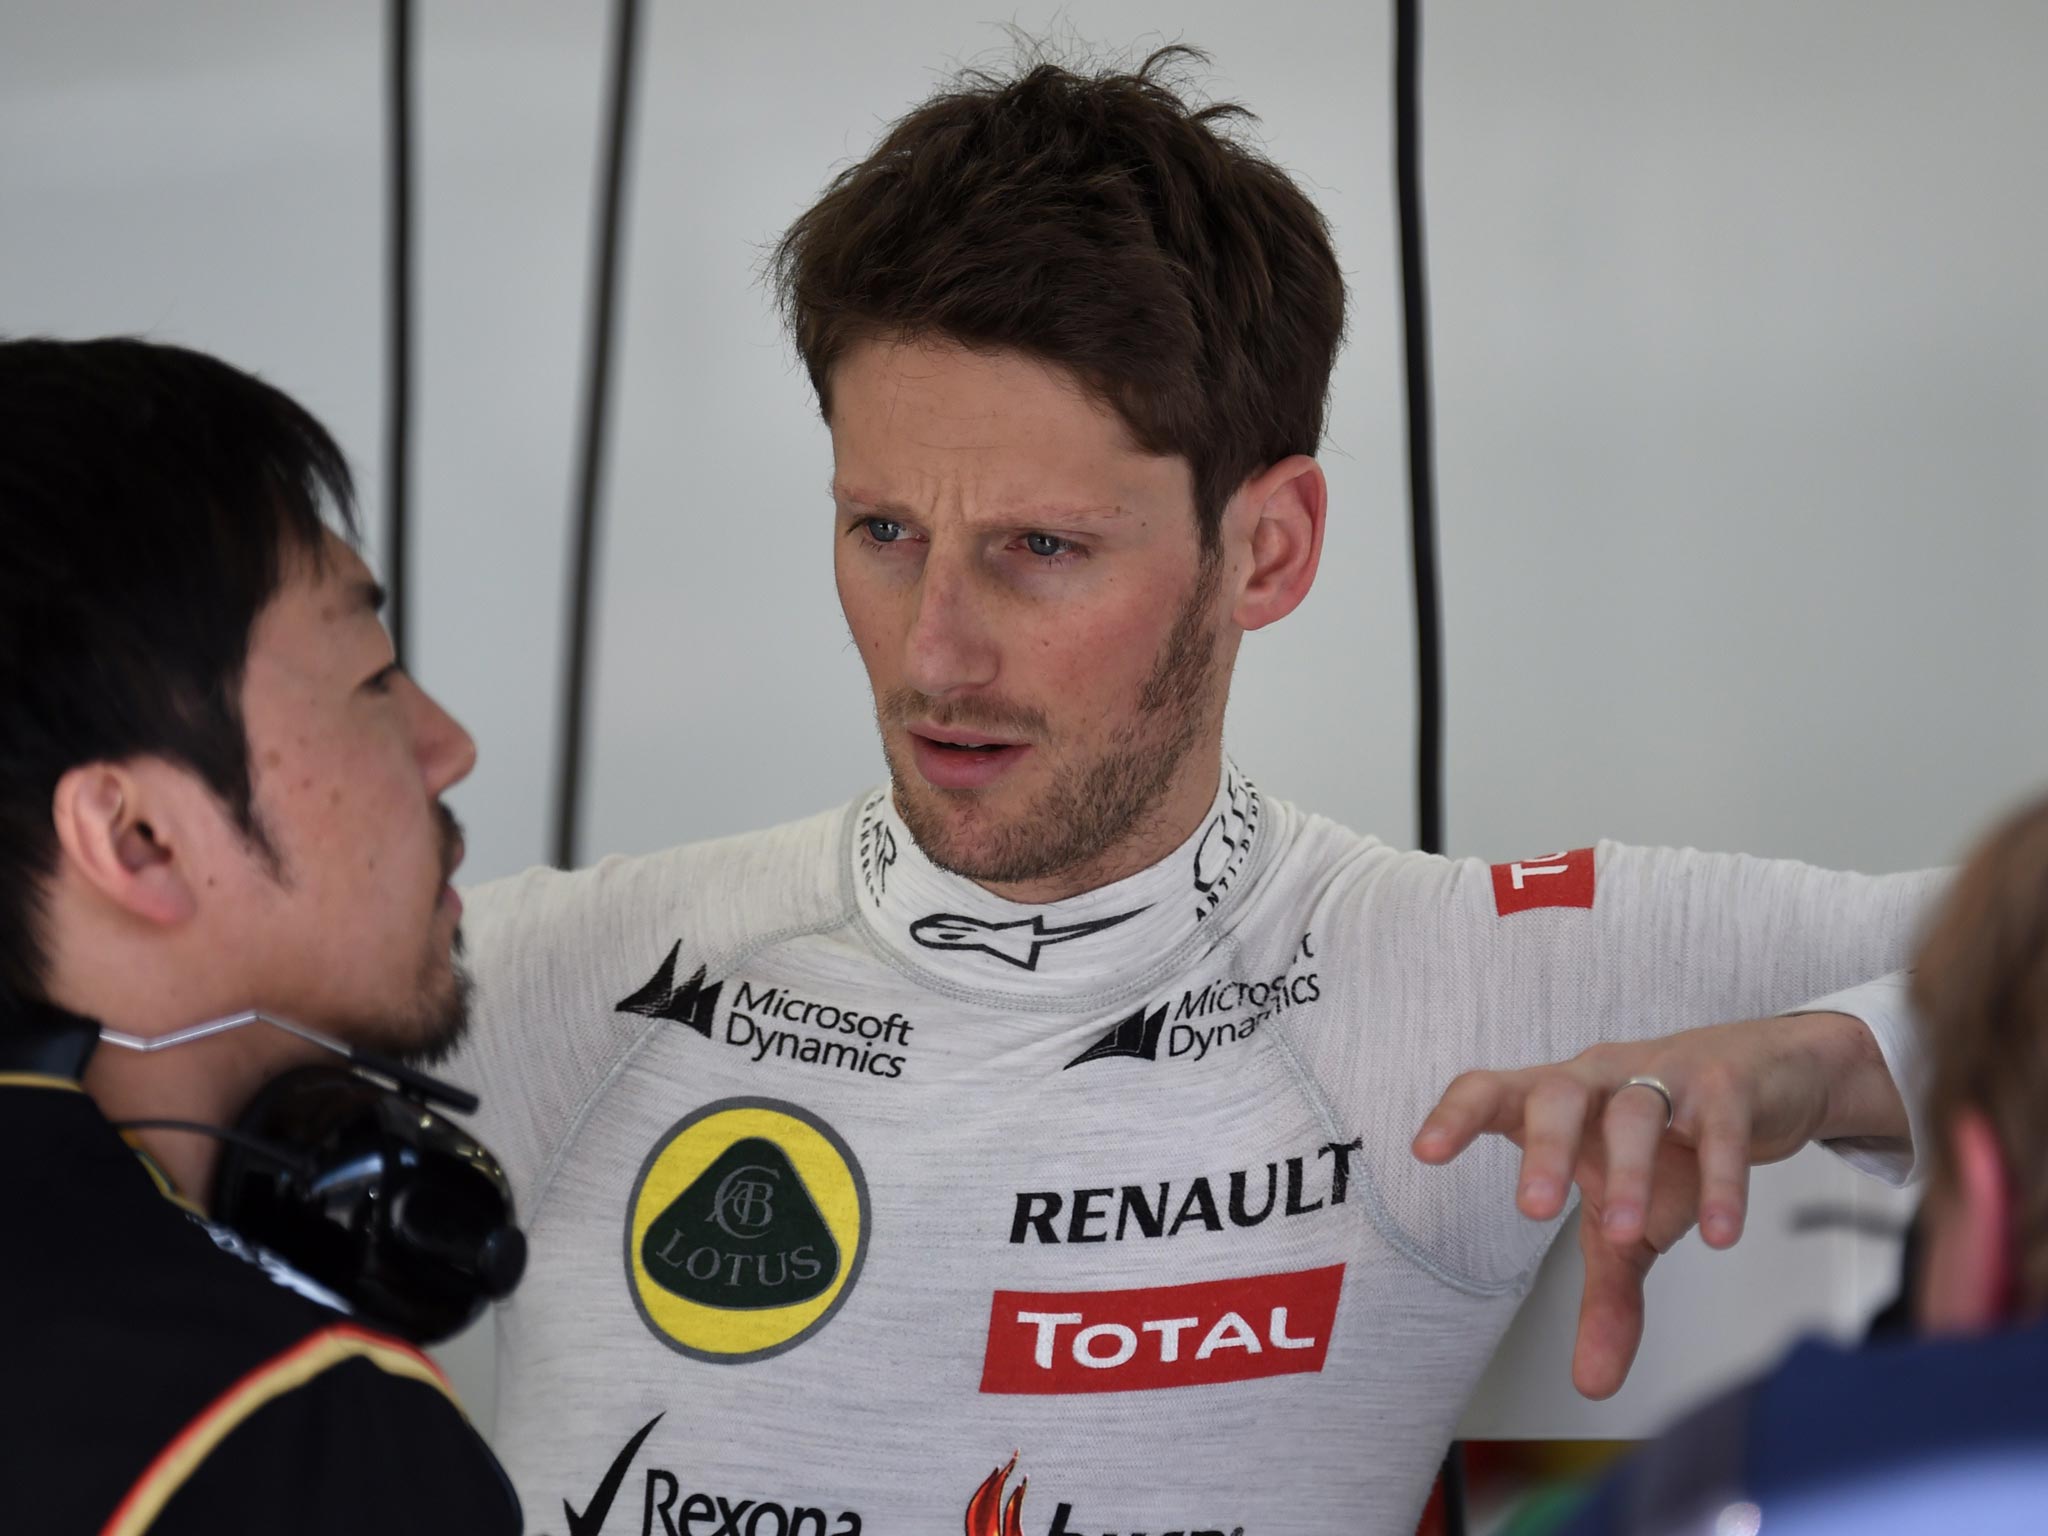 Romain Grosjean has revealed that he has been paid the money owed to him from the back-end of last season by team Lotus